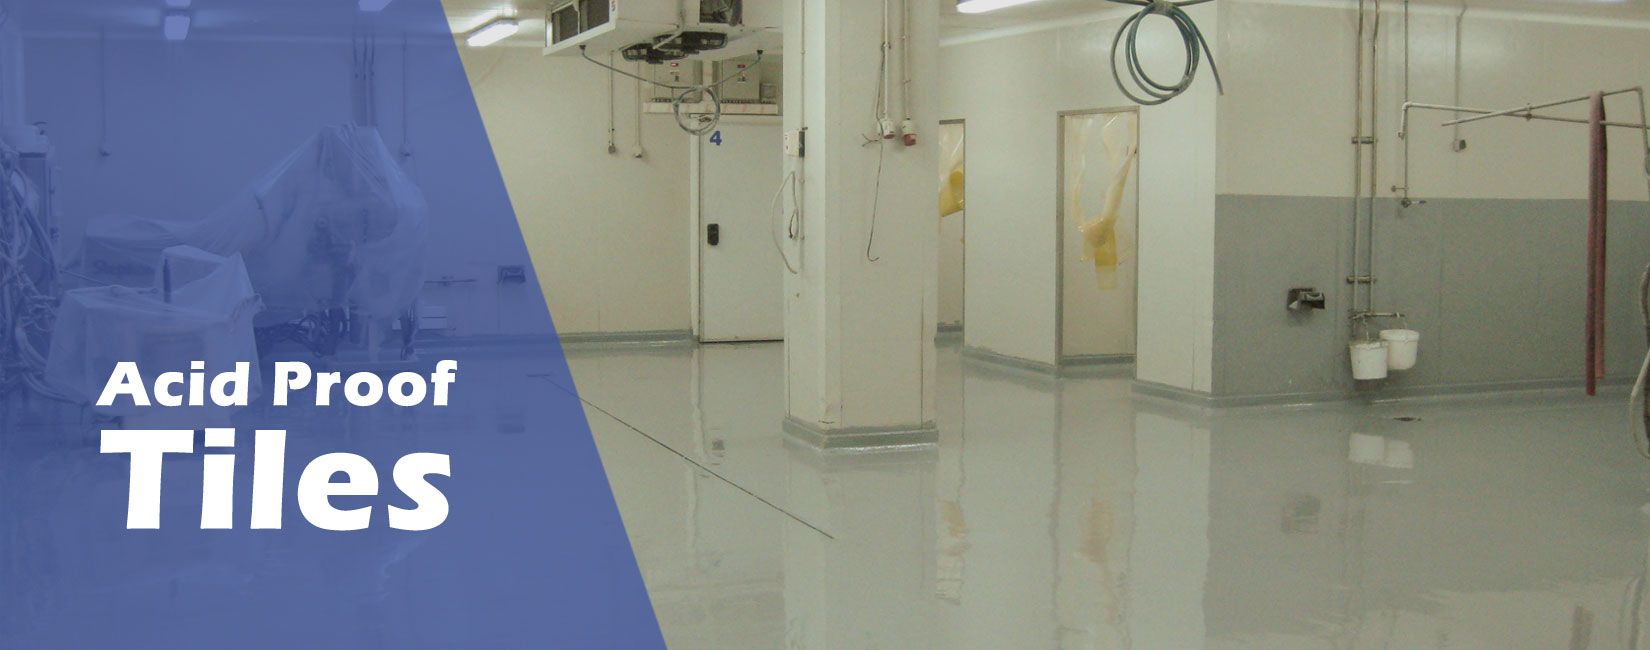 Acid Proof Tiles Manufacturer, Supplier and Exporter in Ahmedabad, Gujarat, India